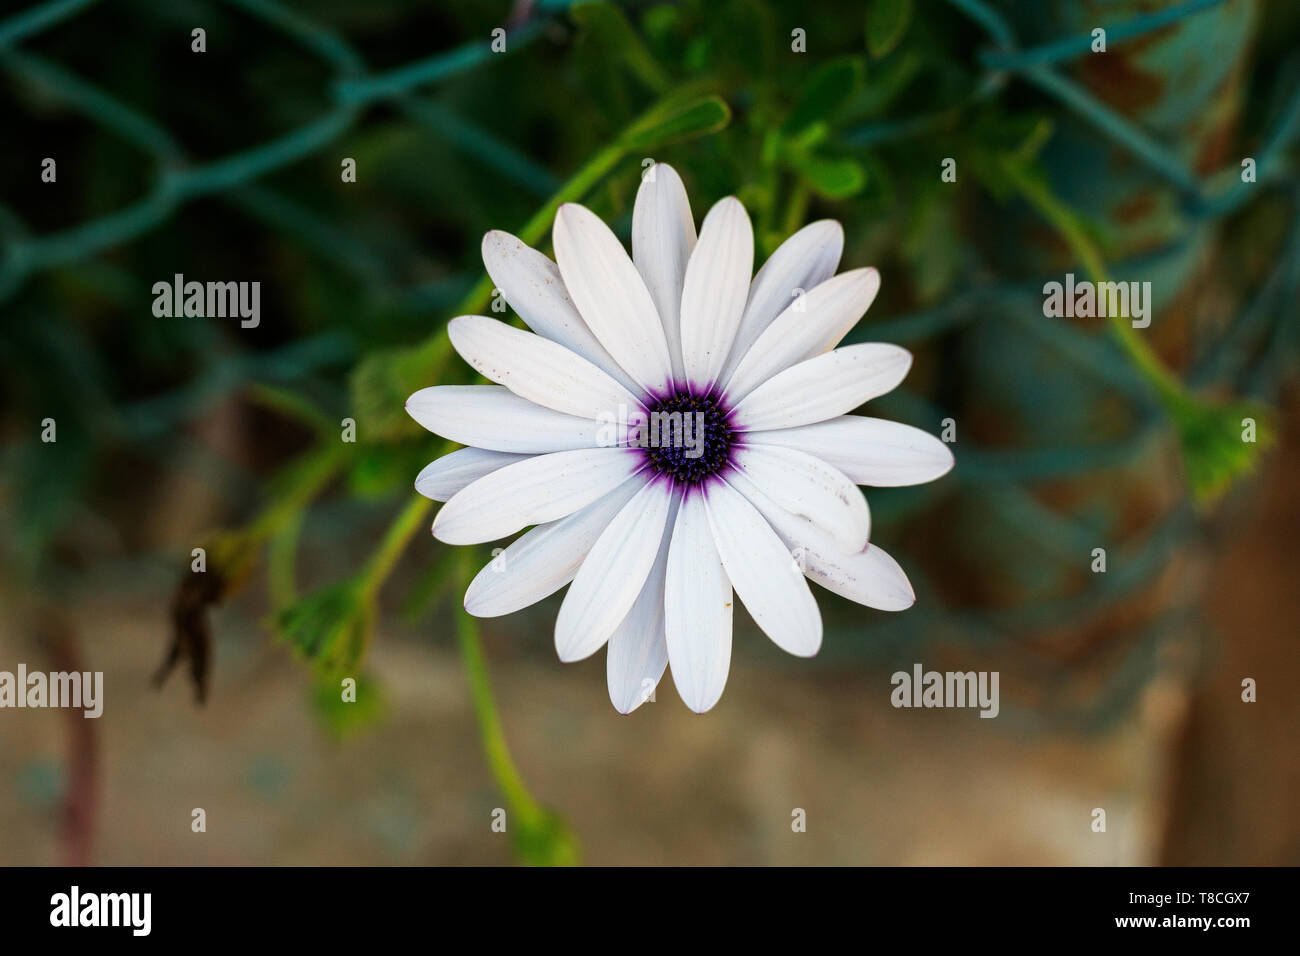 White daisy flower with purple center Stock Photo